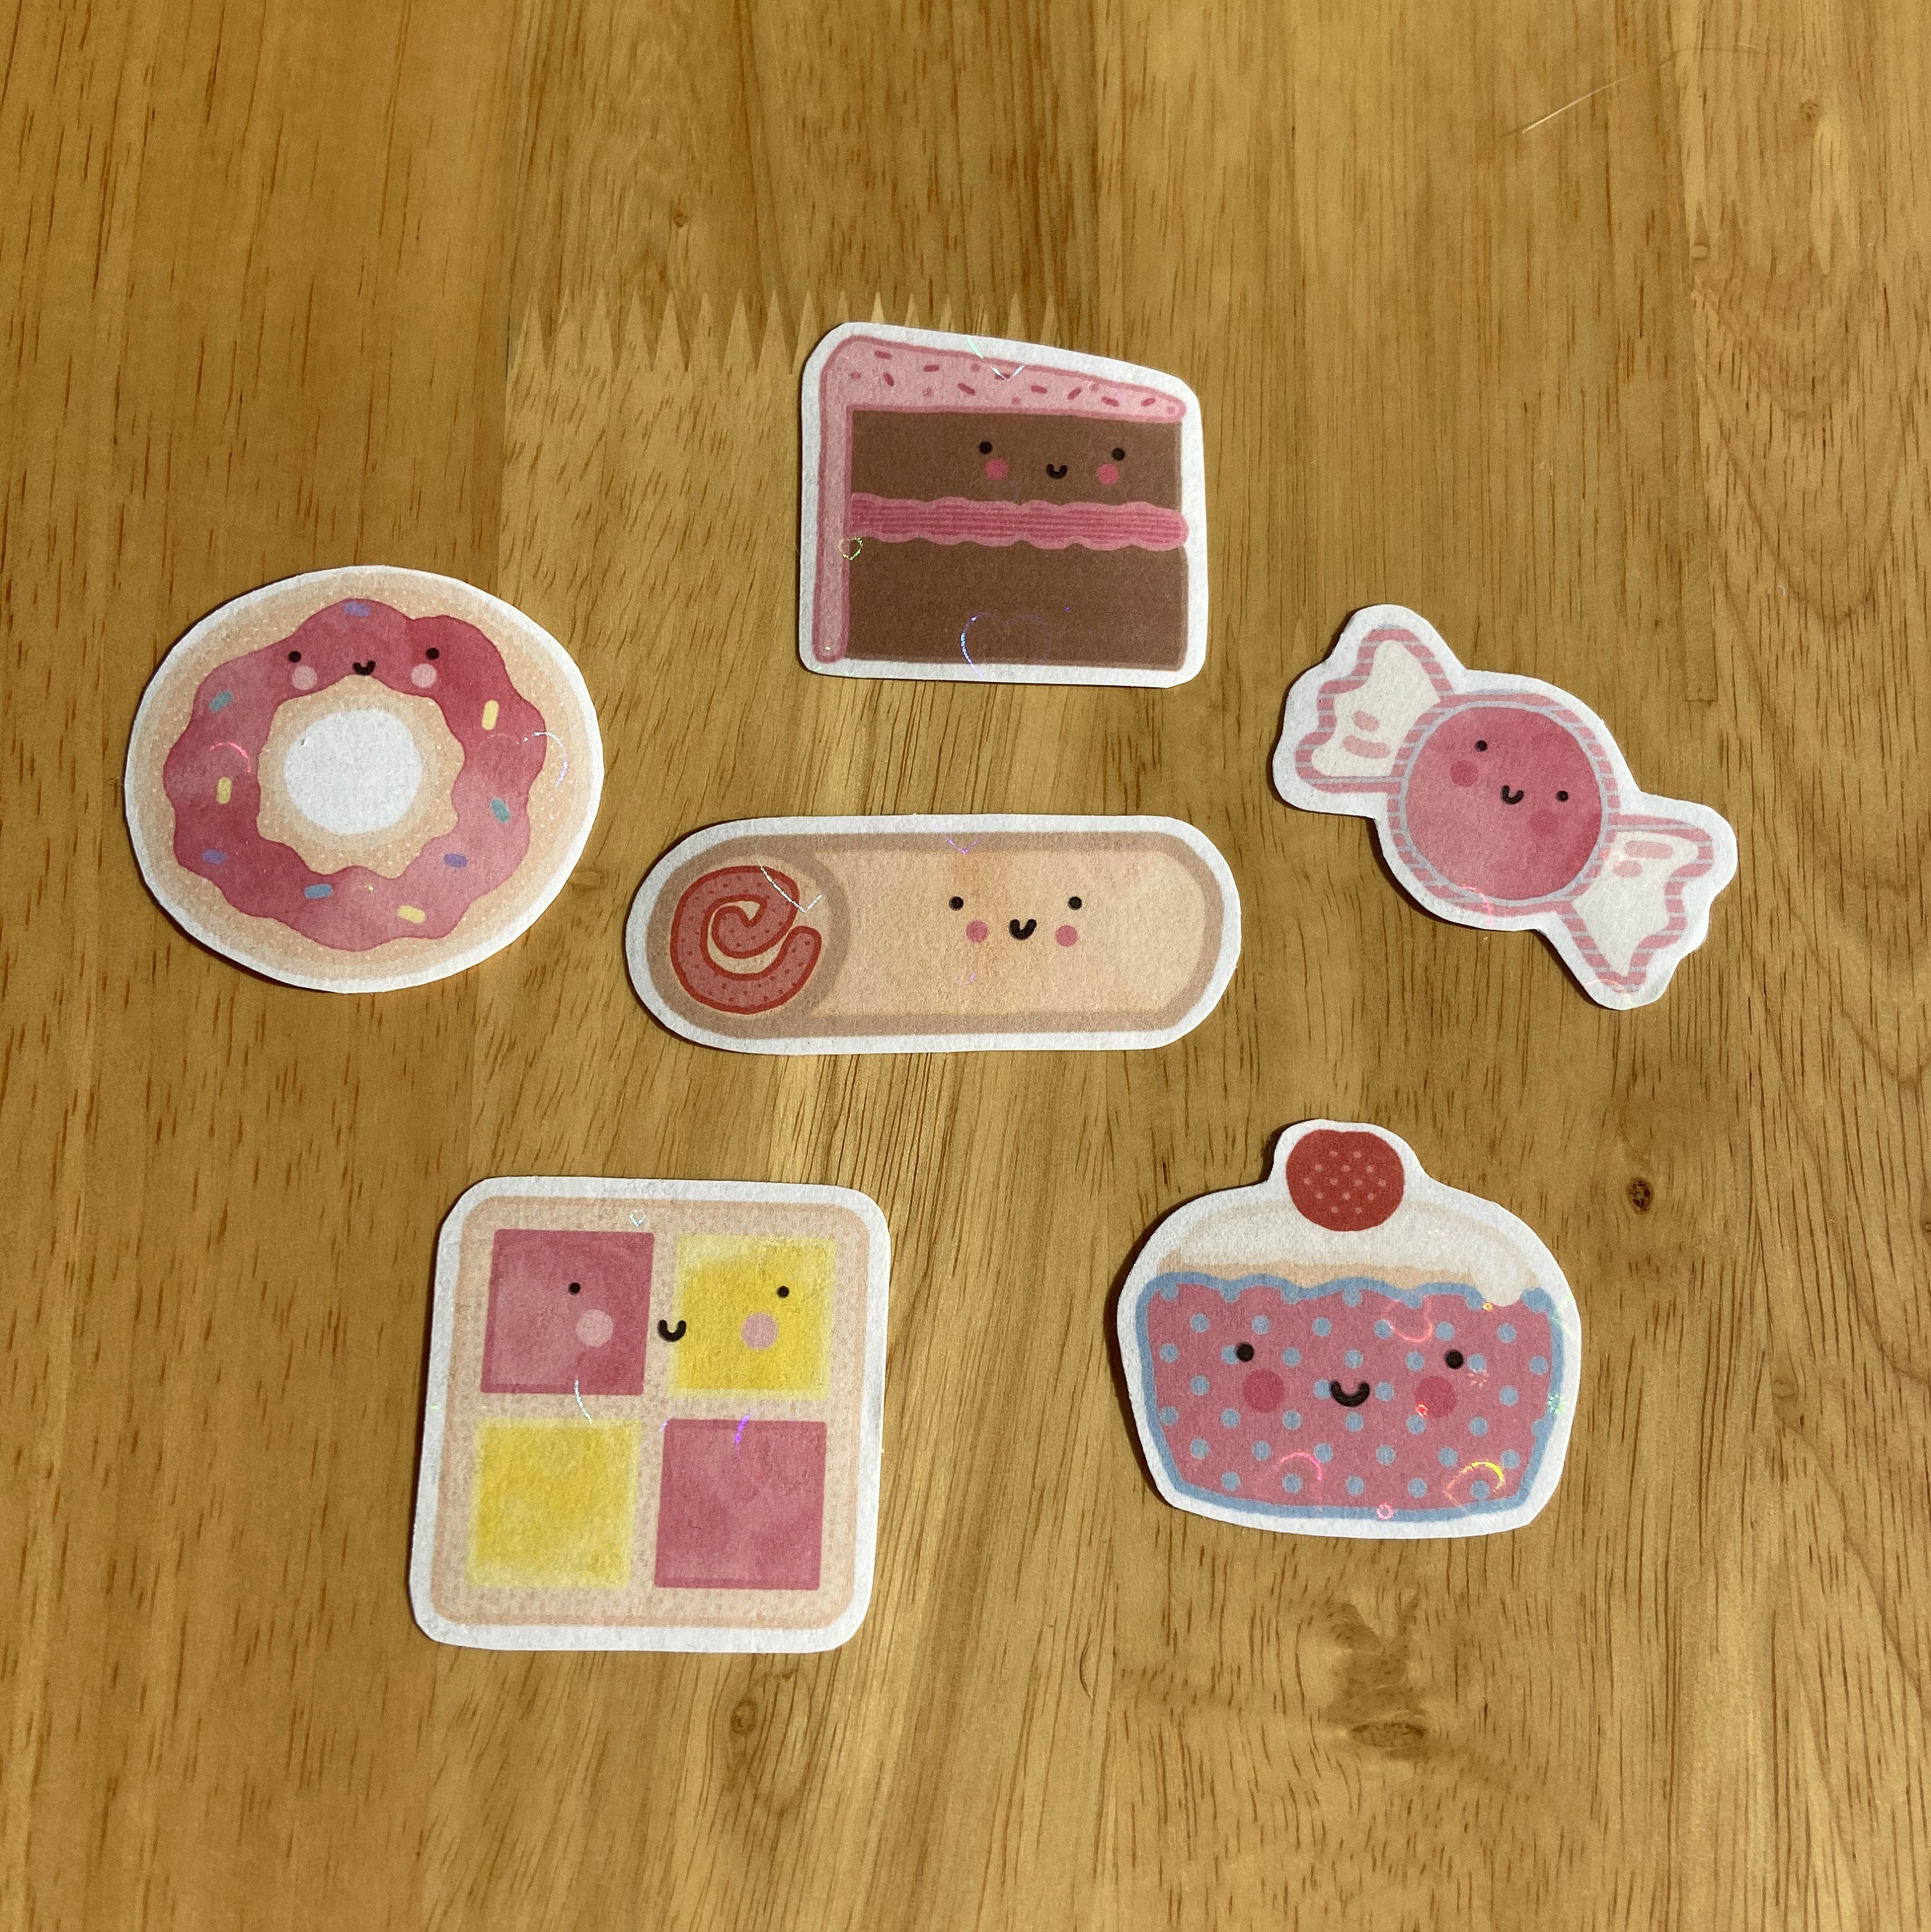 Treats Sticker Pack, Sweets Stickers, Candy Stickers, Fast Food